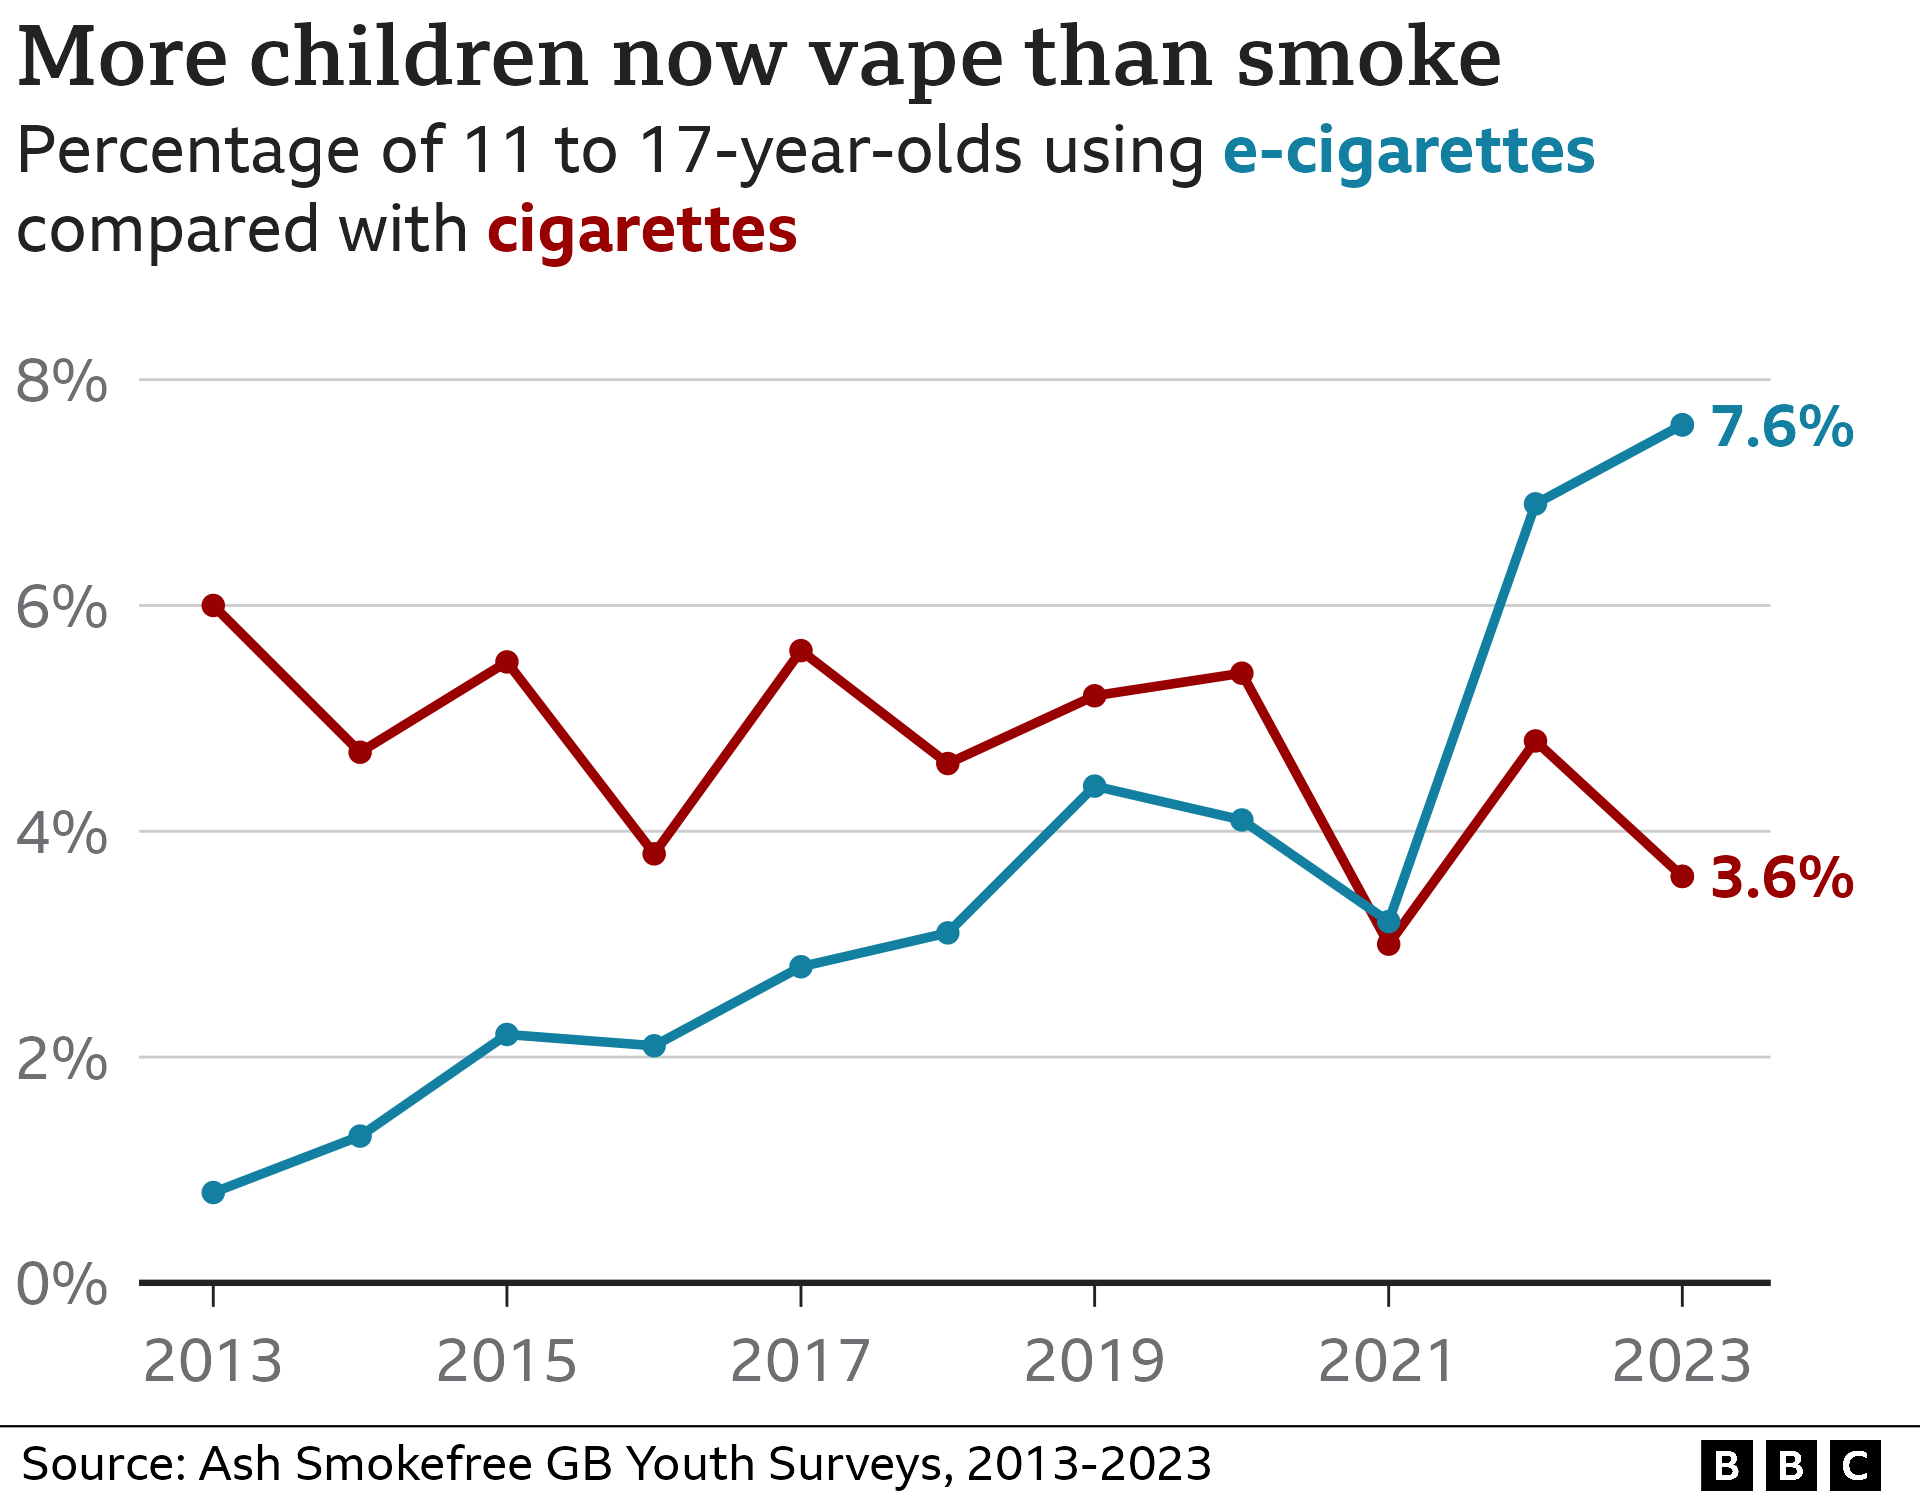 Chart showing smoking and vaping rates for 11 to 17-year-olds